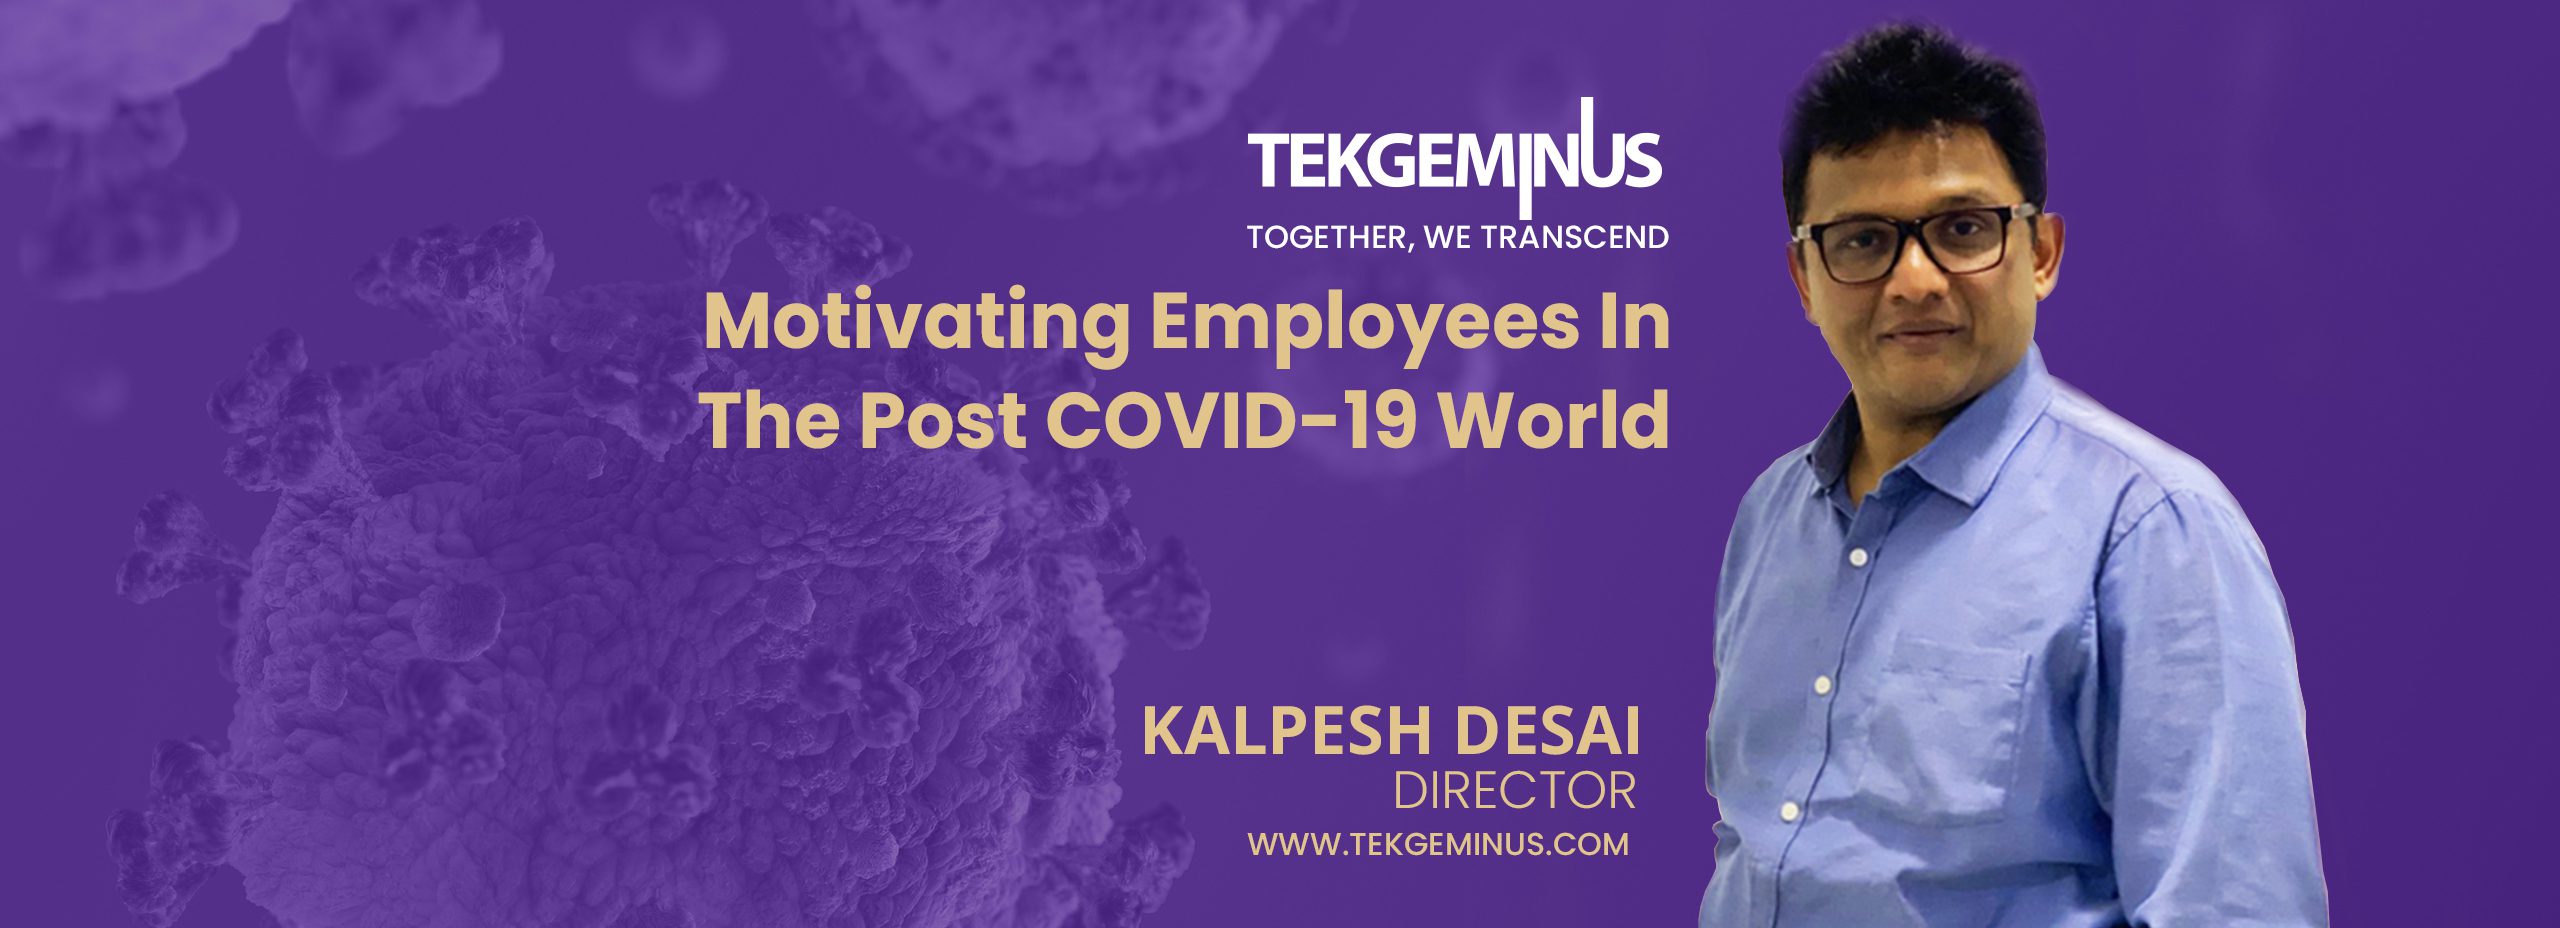 Motivating Employees In The Post COVID-19 World